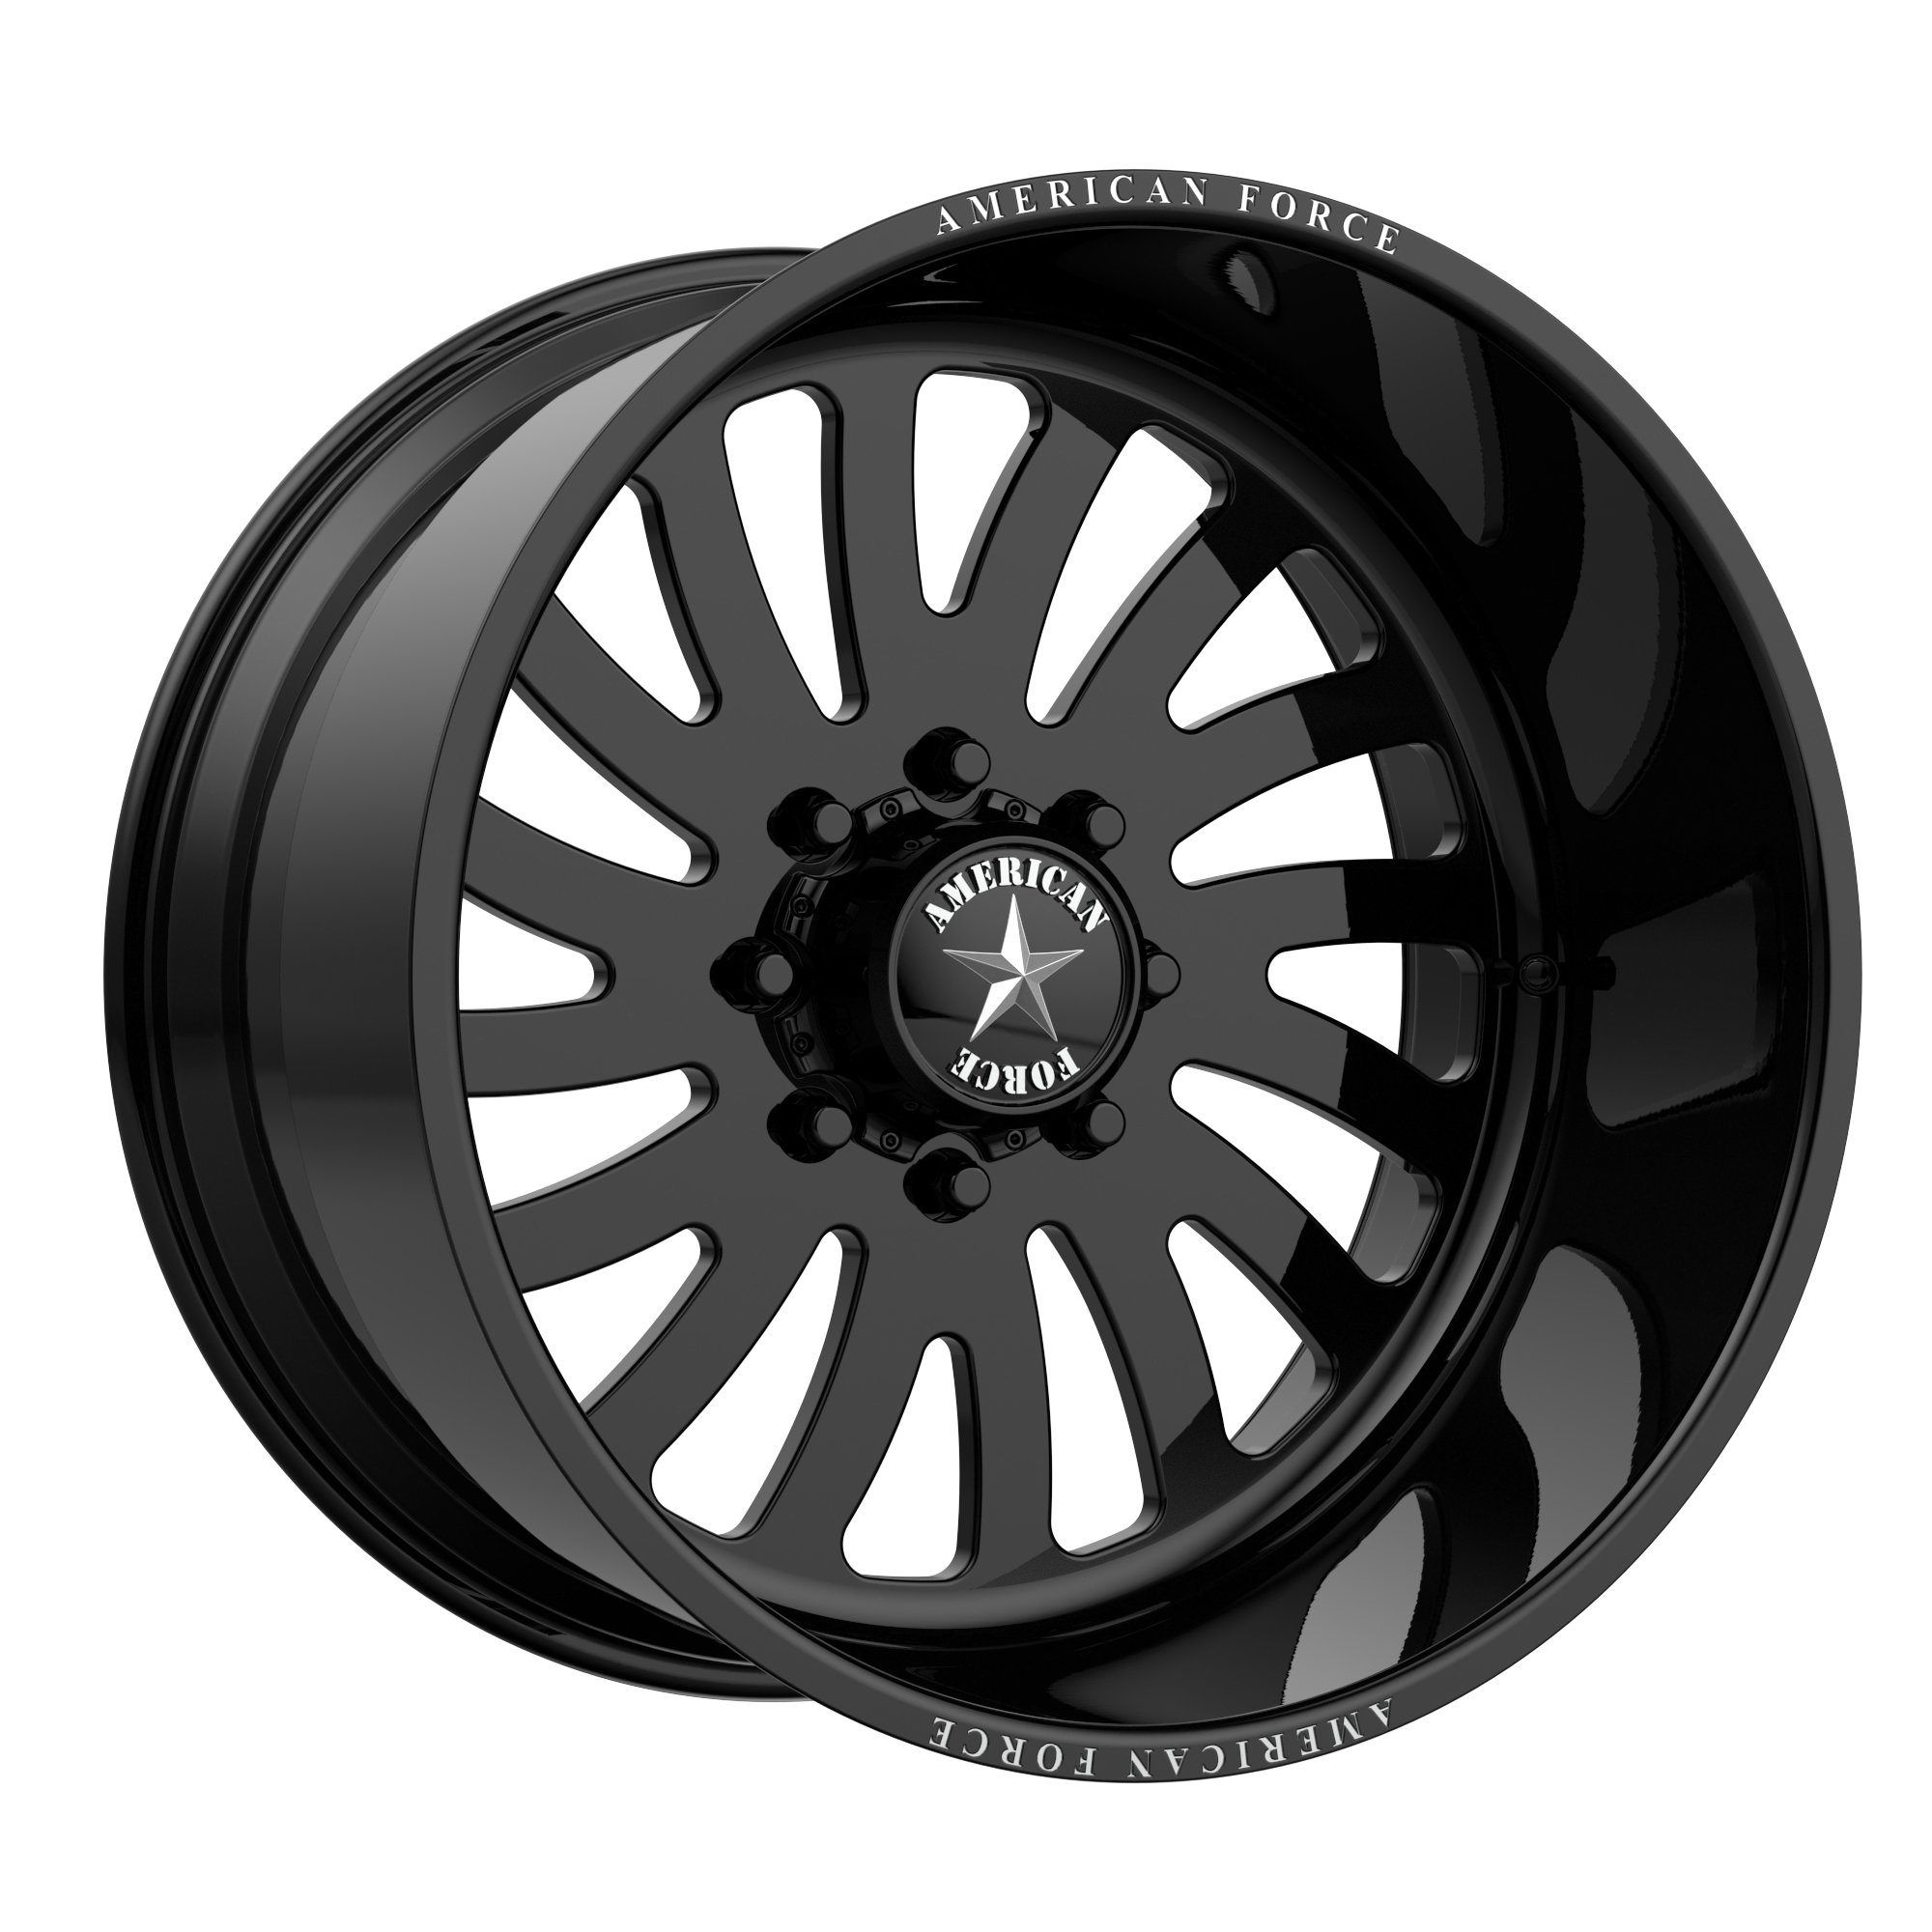 OCTANE SS 26x14 6x135.00 GLOSS BLACK MACHINED (-73 mm) - Tires and Engine Performance